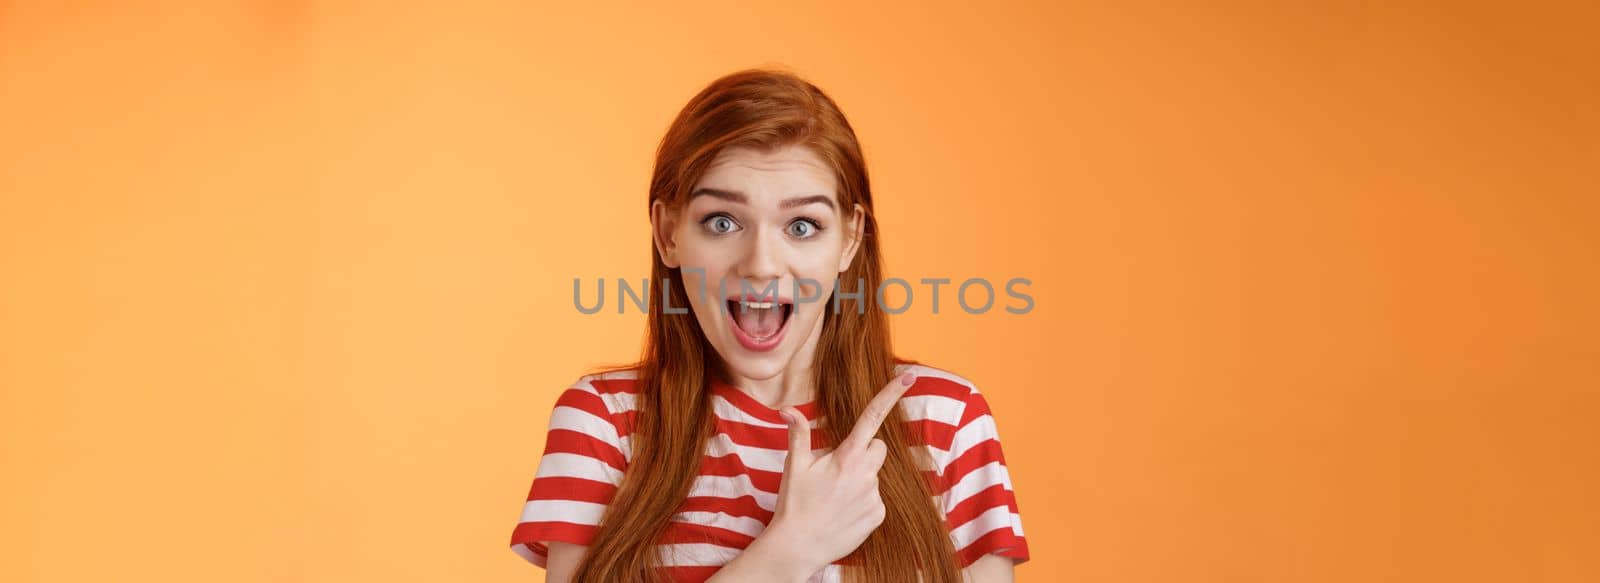 Excited female redhead hear impressive sale offer pointing upper left corner, drop jaw astonished stare camera full disbelief surprise, discuss interesting promotion, stand orange background.